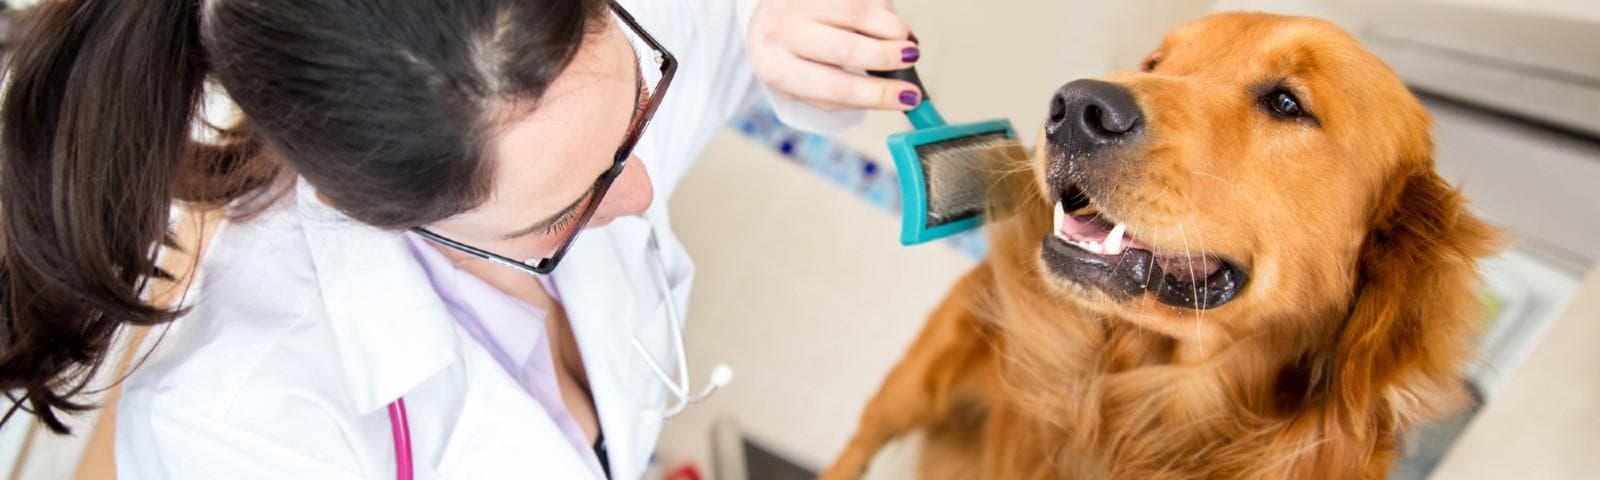 A Veterinarian brushing the hair of a brown dog